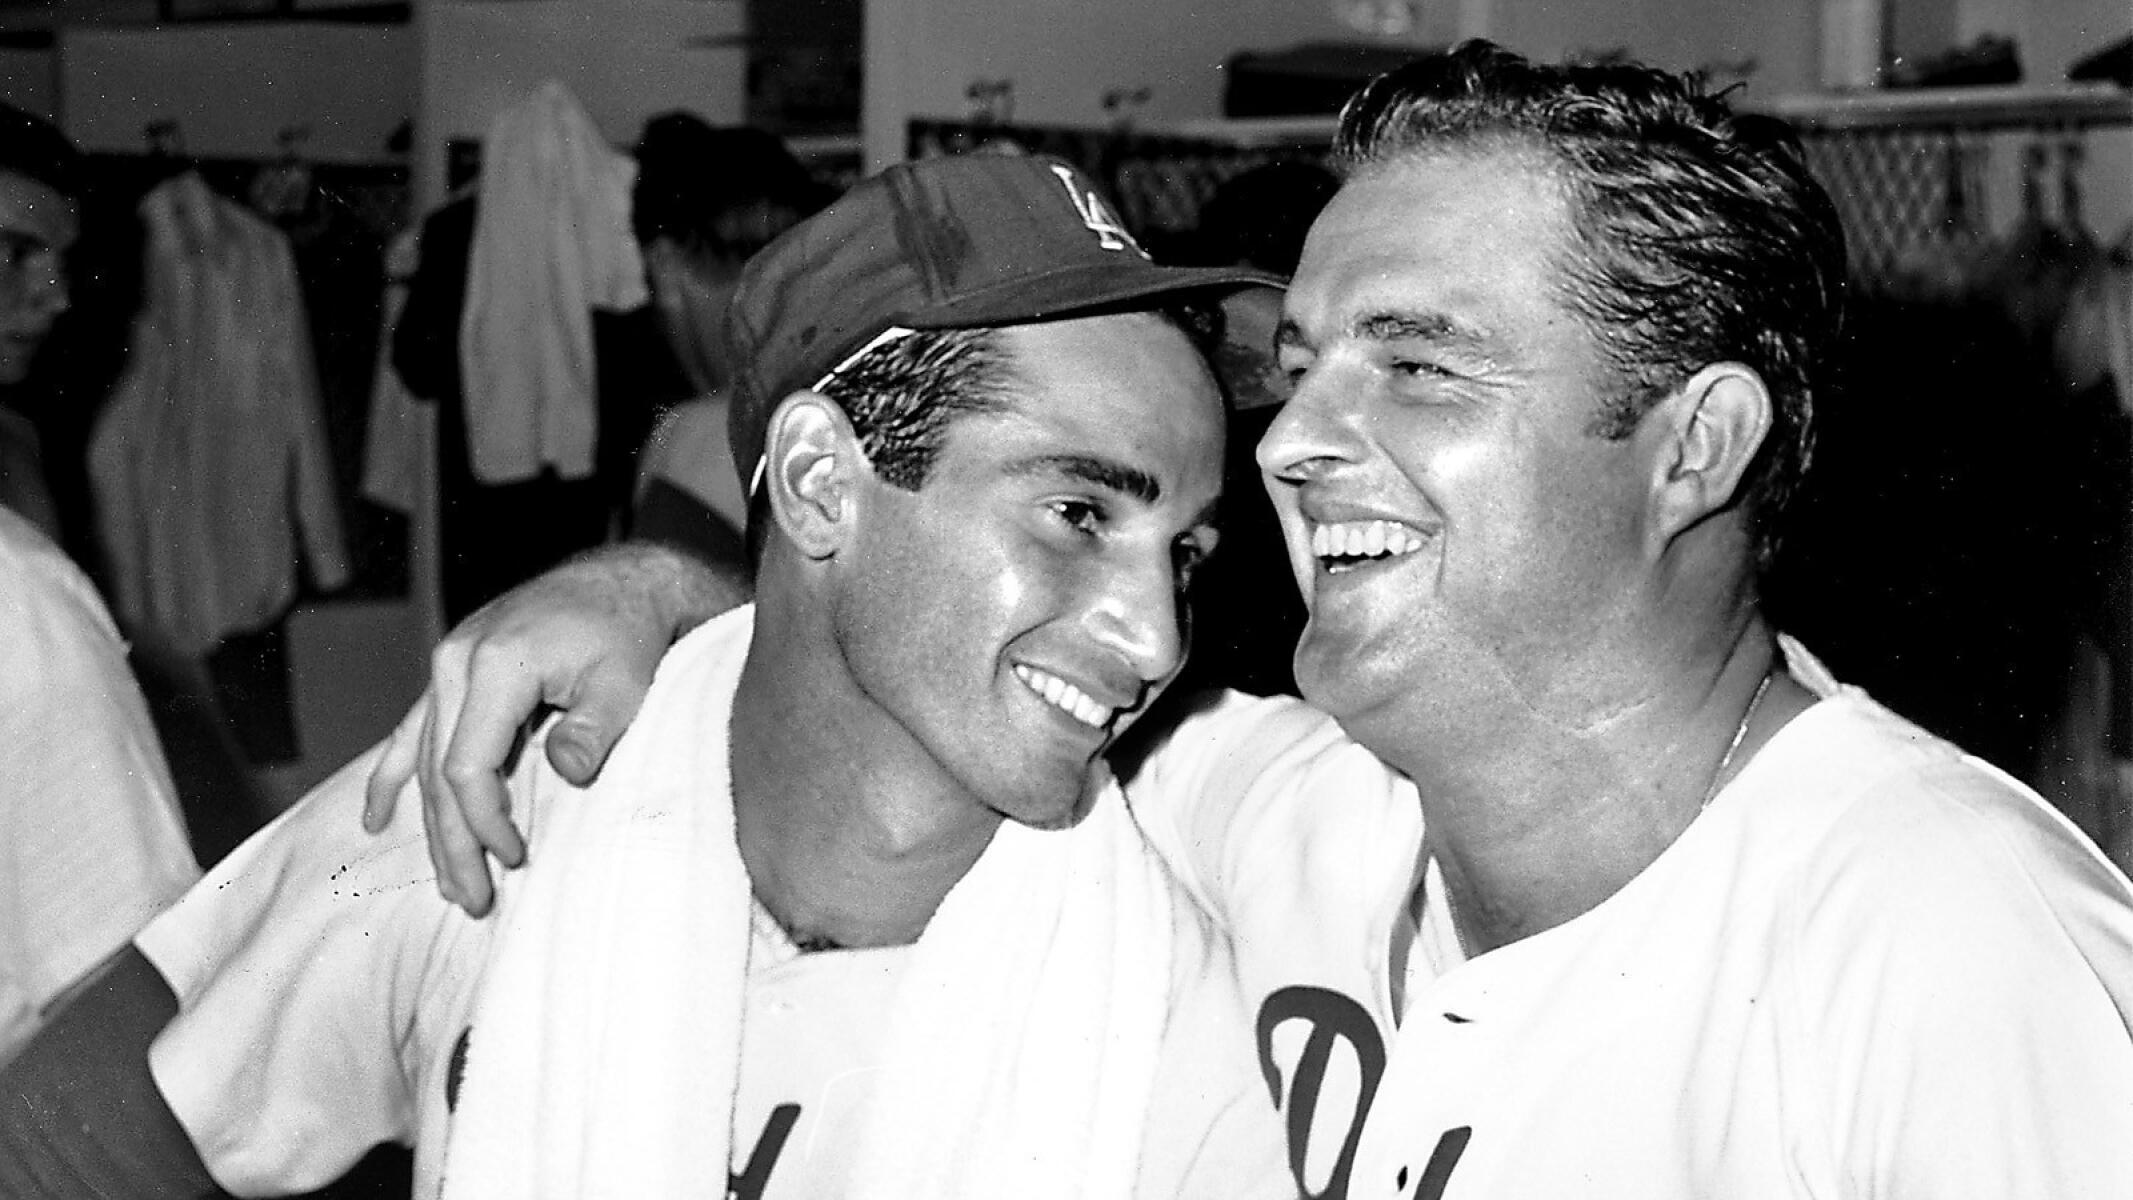 Baseball pitchers Don Drysdale (53) and Sandy Koufax share a laugh in the dressing room at Dodger Stadium.